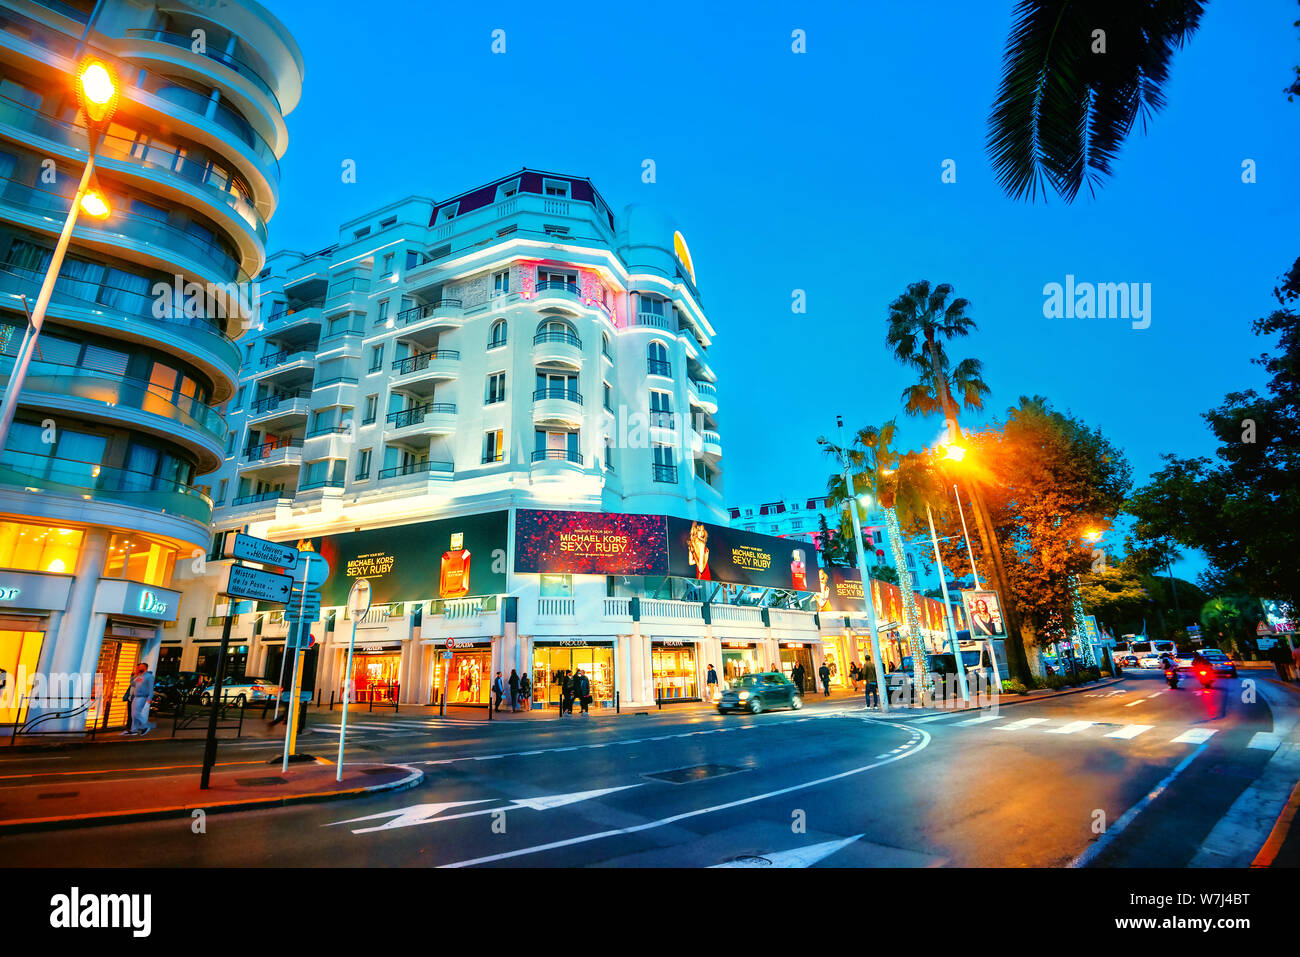 Cityscape of main street and road with luxury hotels and shops   at night. Cannes, France, French Riviera Stock Photo